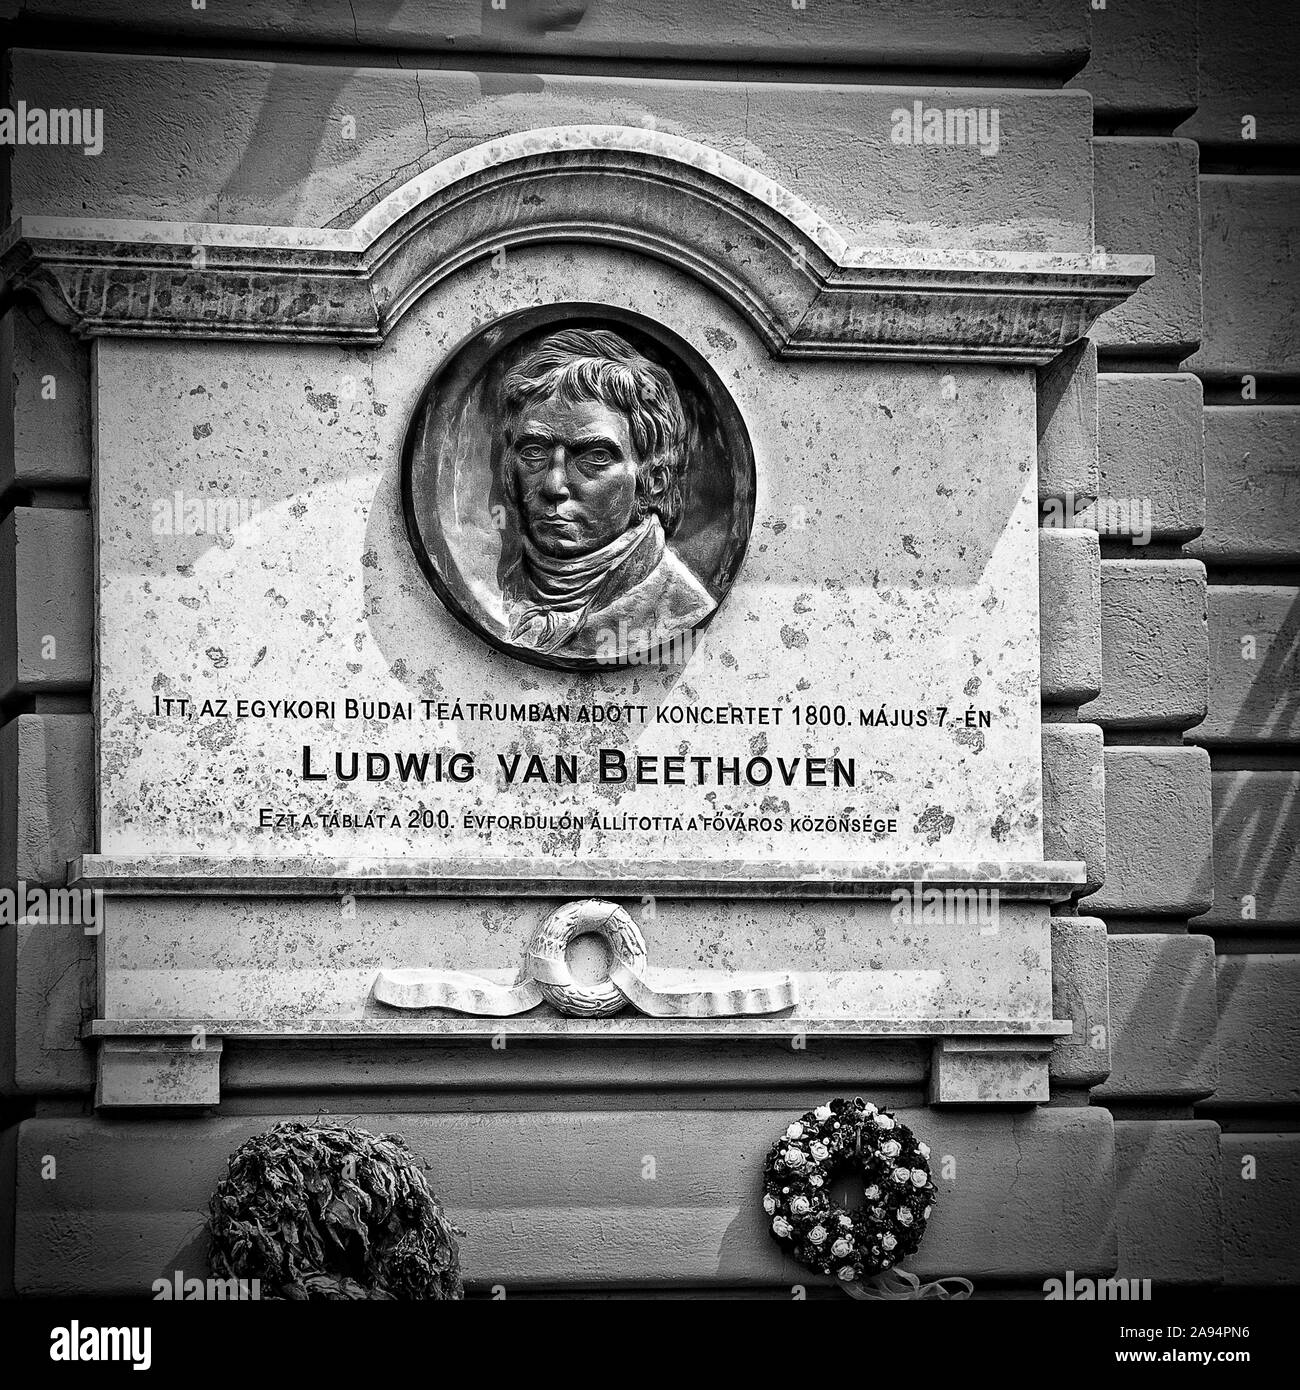 Plaque commemorating  a concert by Ludwig van Beethoven in Budapest, Hungary. Photograph clearly shows details of the Beethoven portrait. Stock Photo